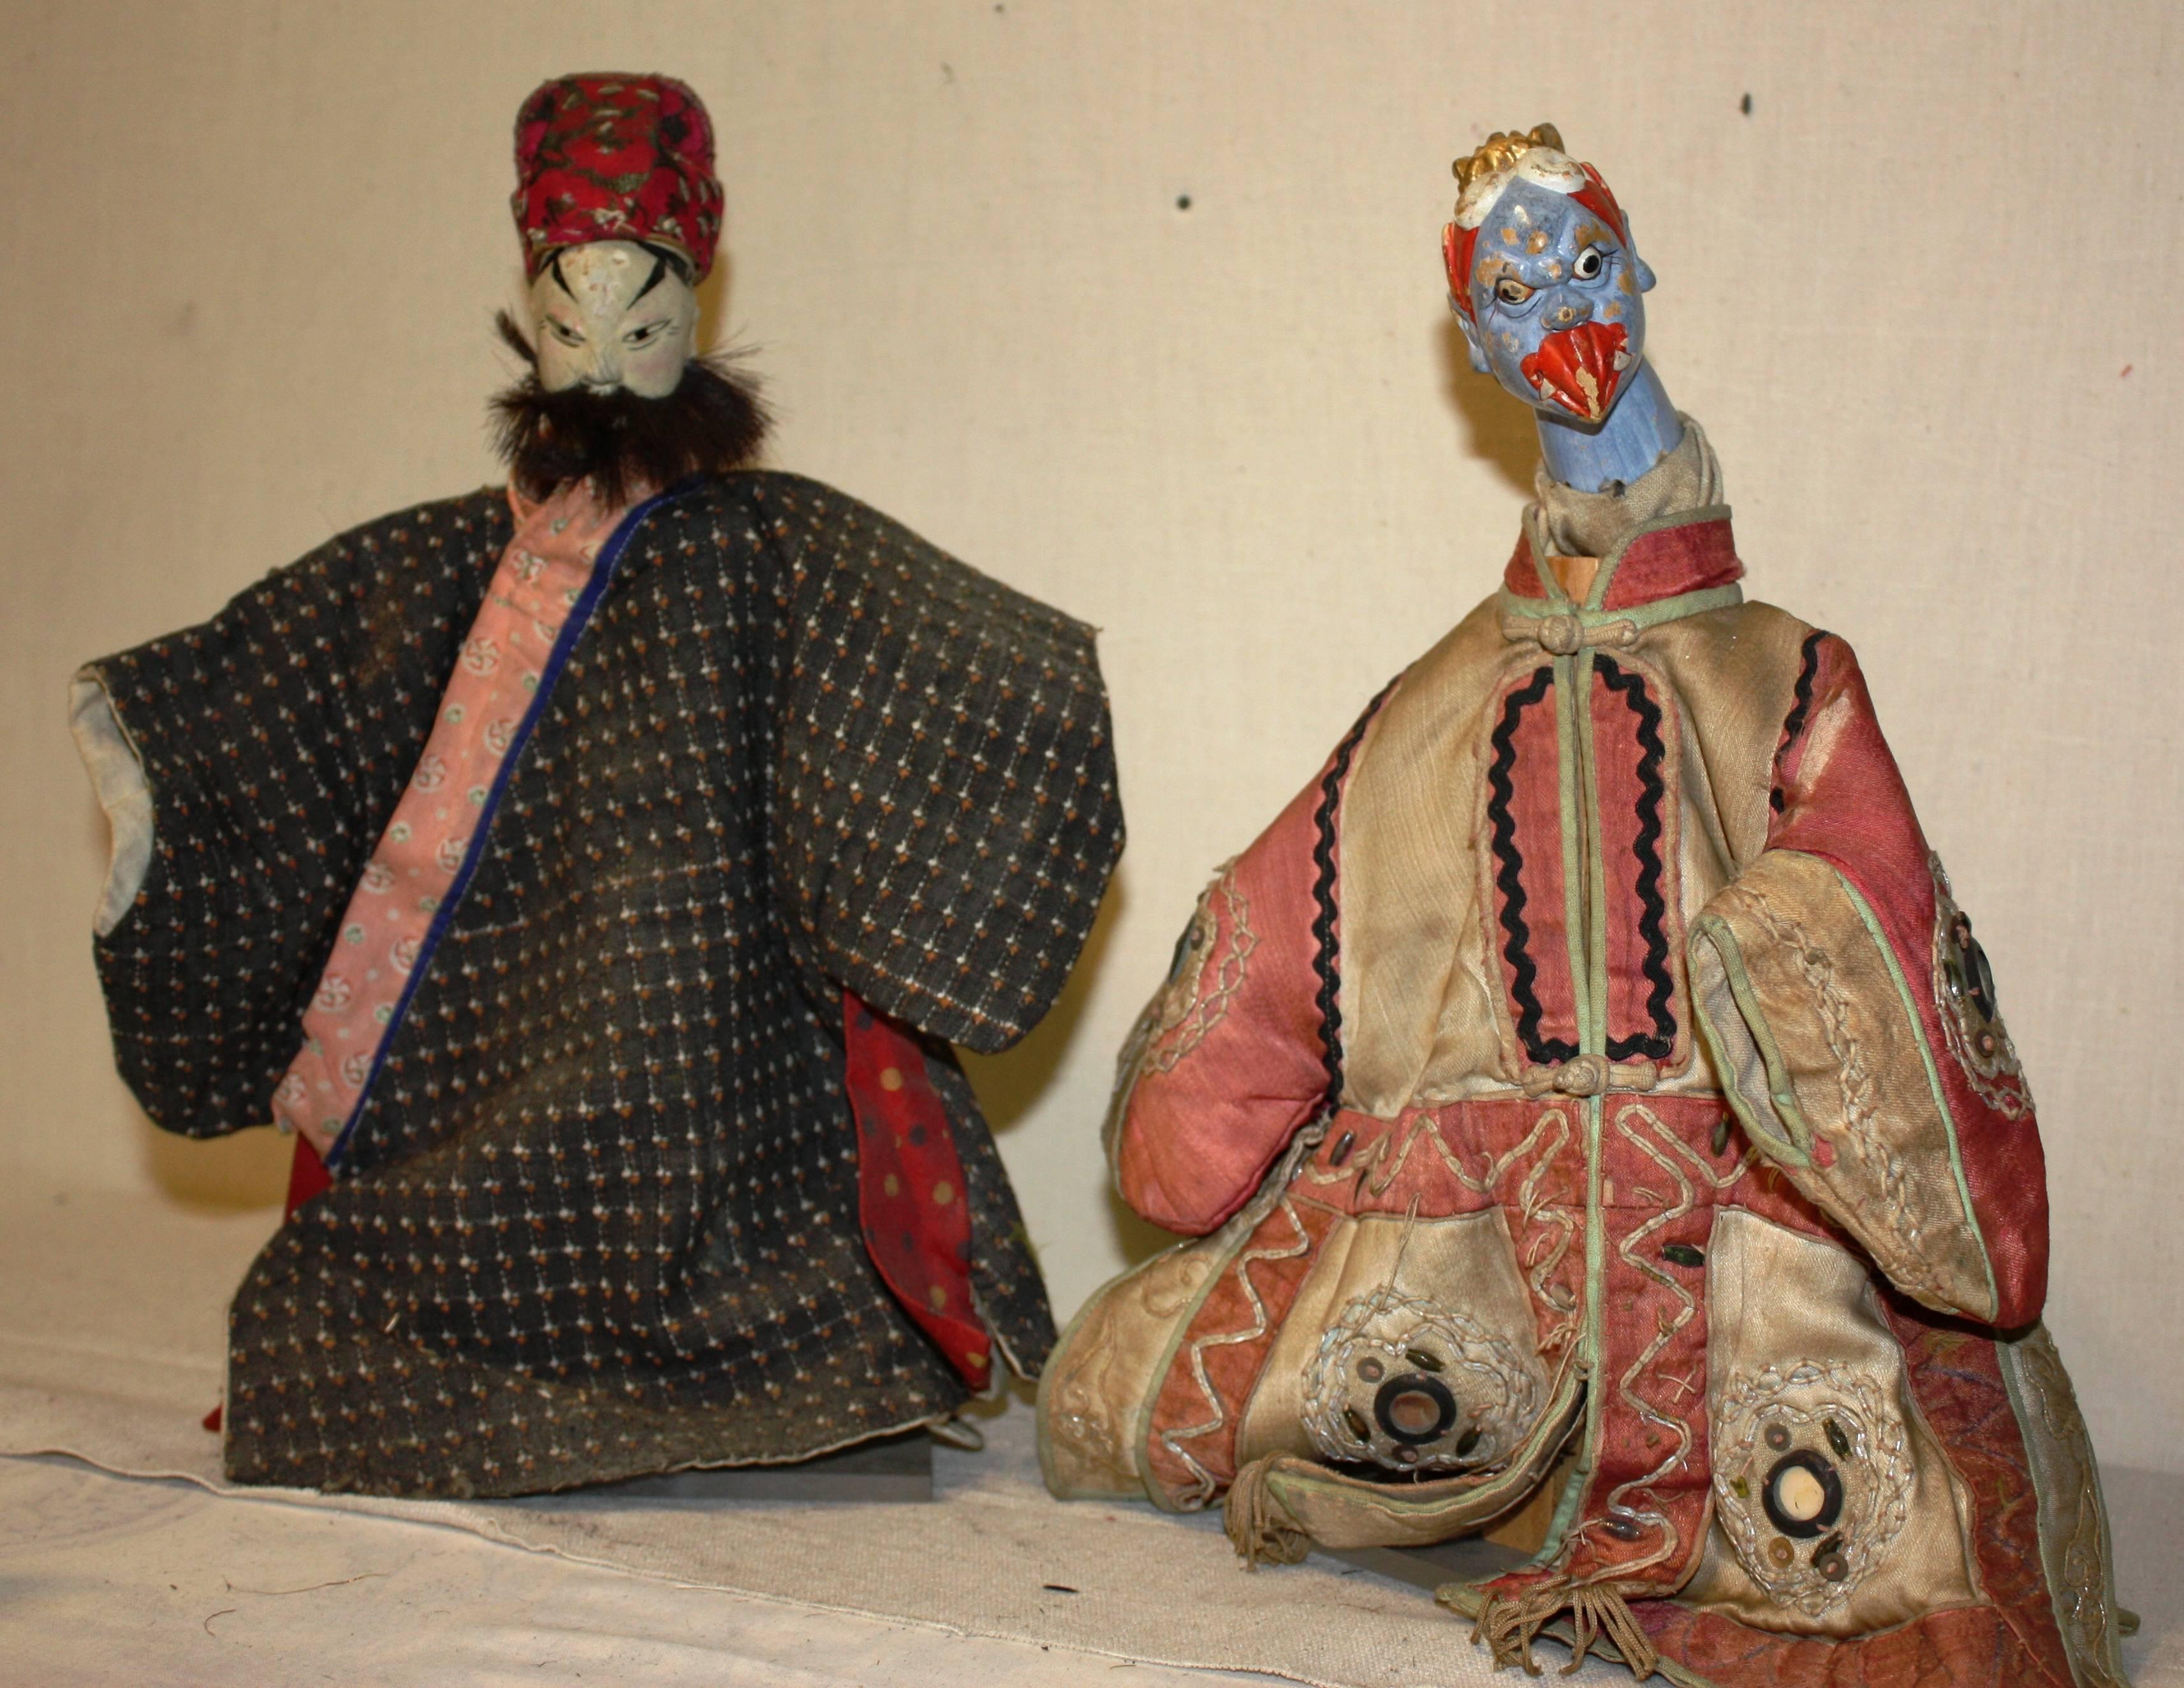 Ceramic Collection of Four 19th Century Chinese Hand-Puppets